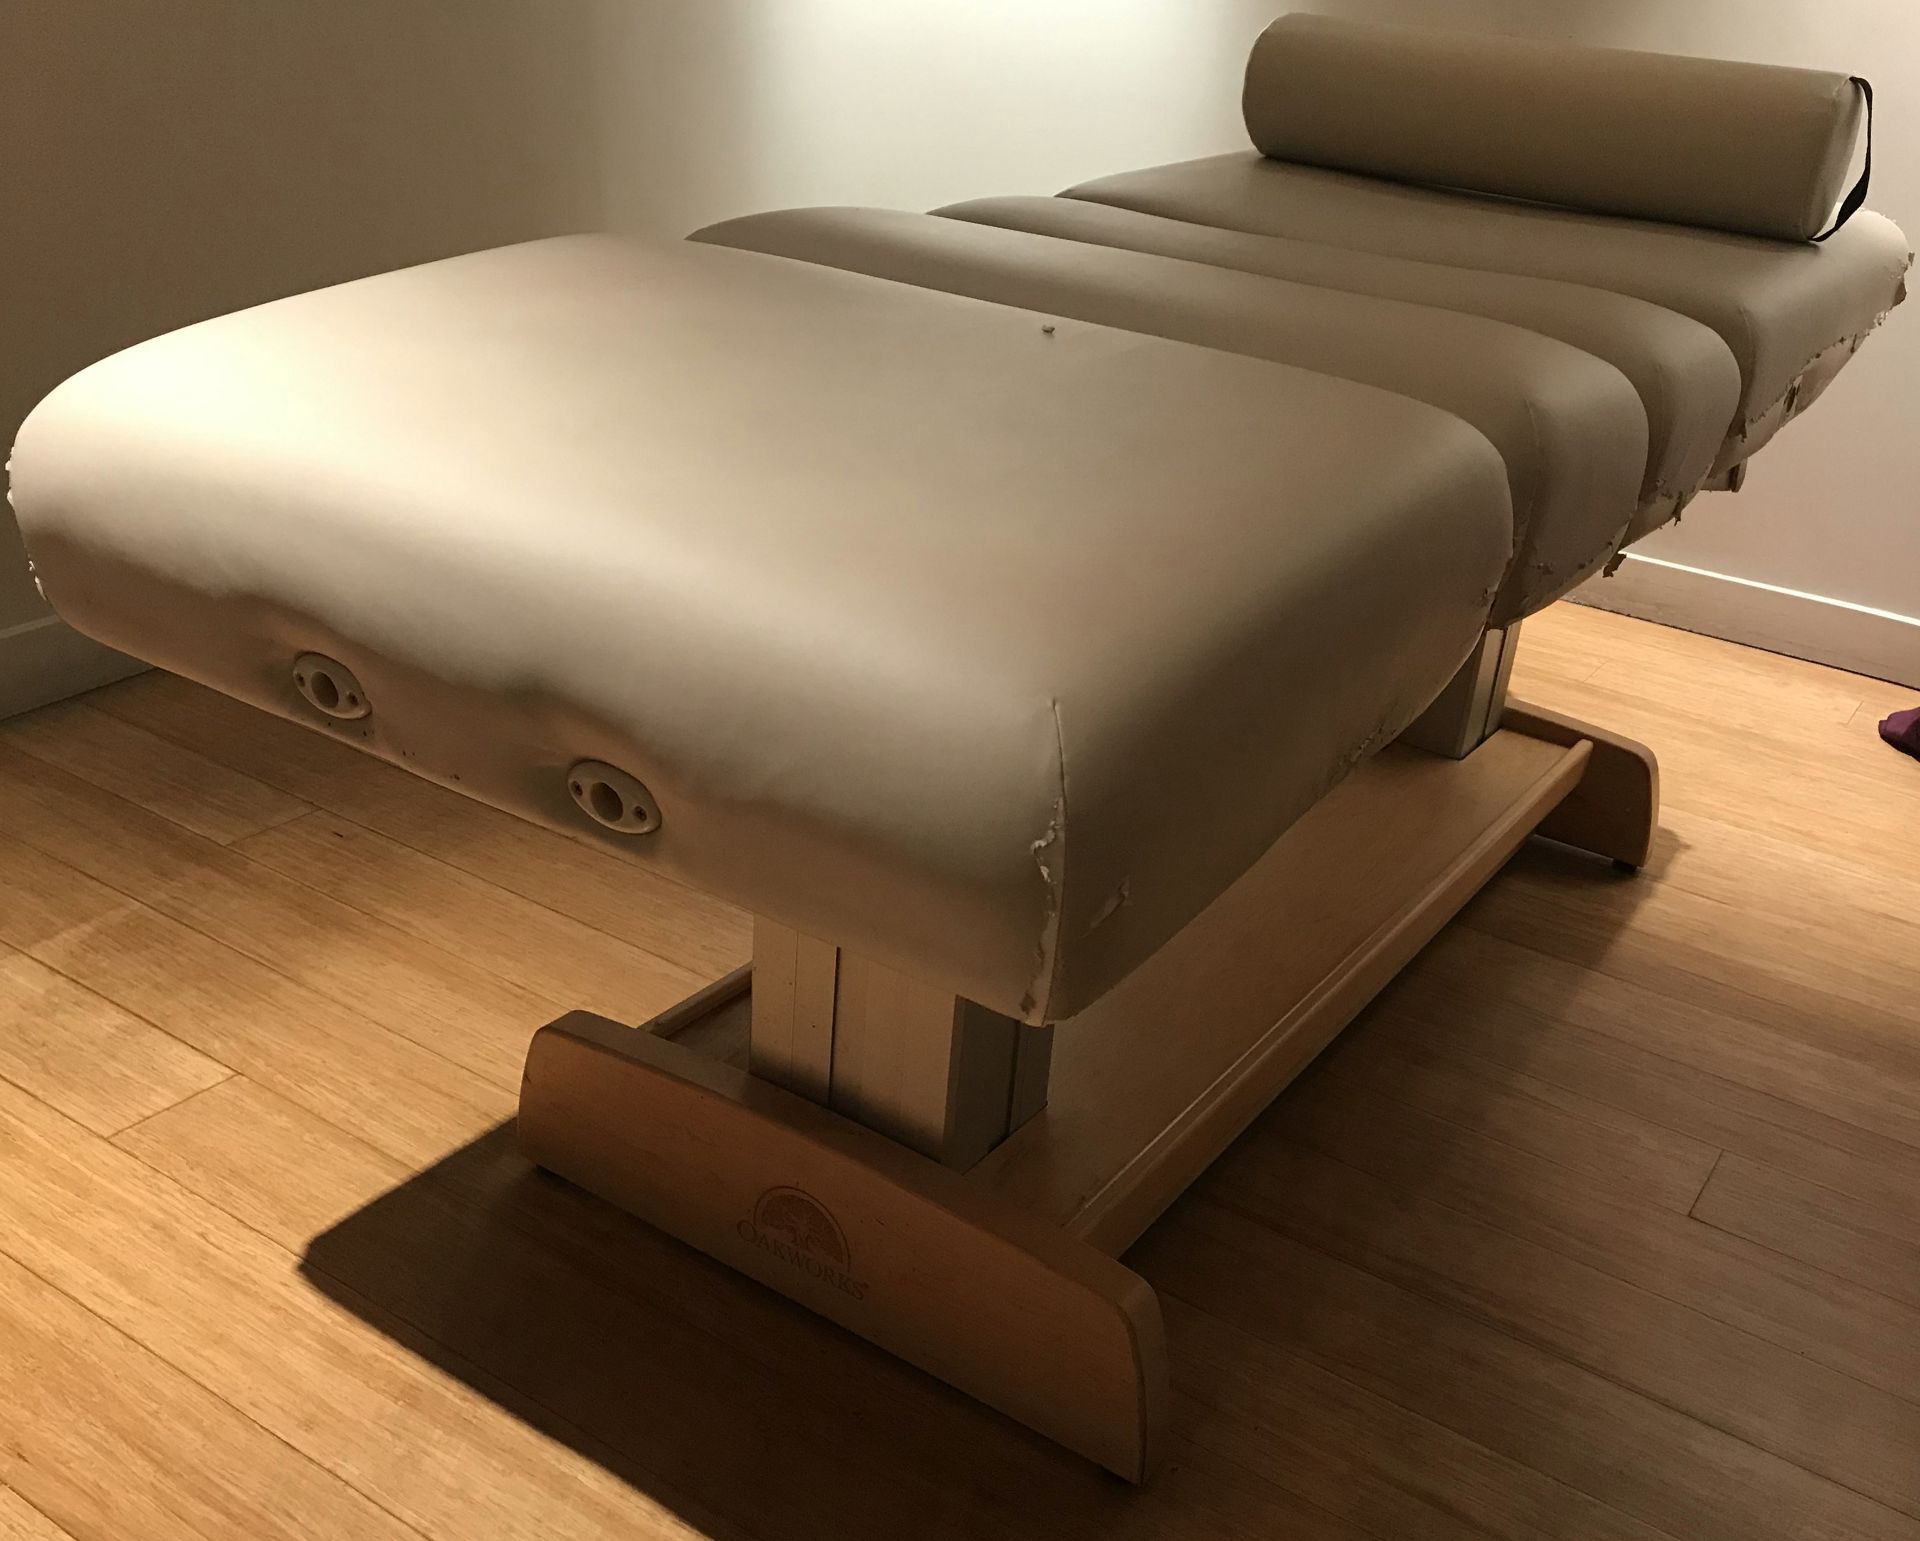 1 x Oakworks Clinician Electric-Hydraulic Massage Table With Footpedal and Linak HBWO Remote Control - Bild 5 aus 11